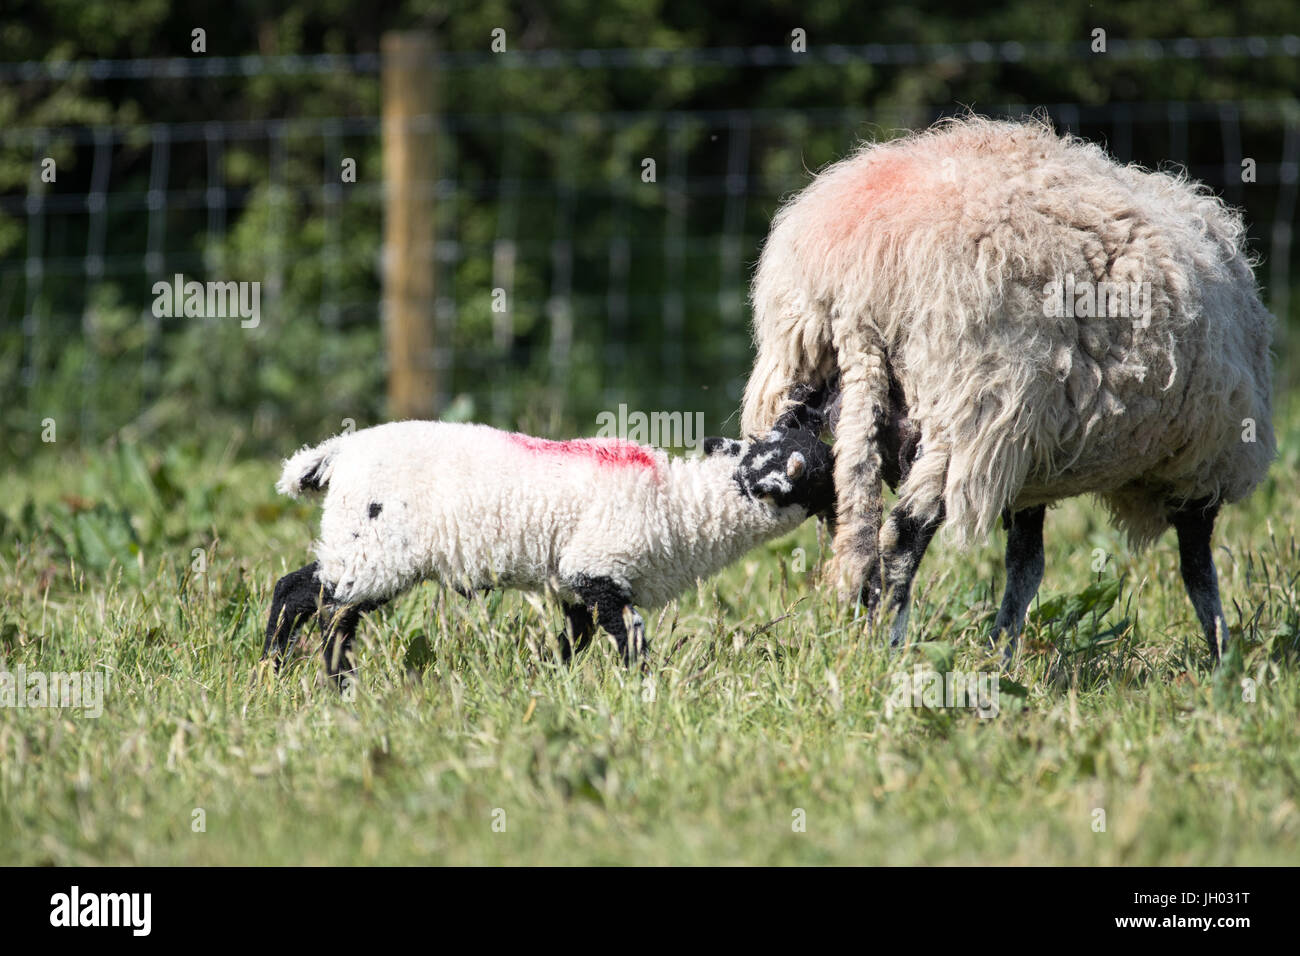 Young lamb suckles milk from his mother ewe in a field of grass. Stock Photo